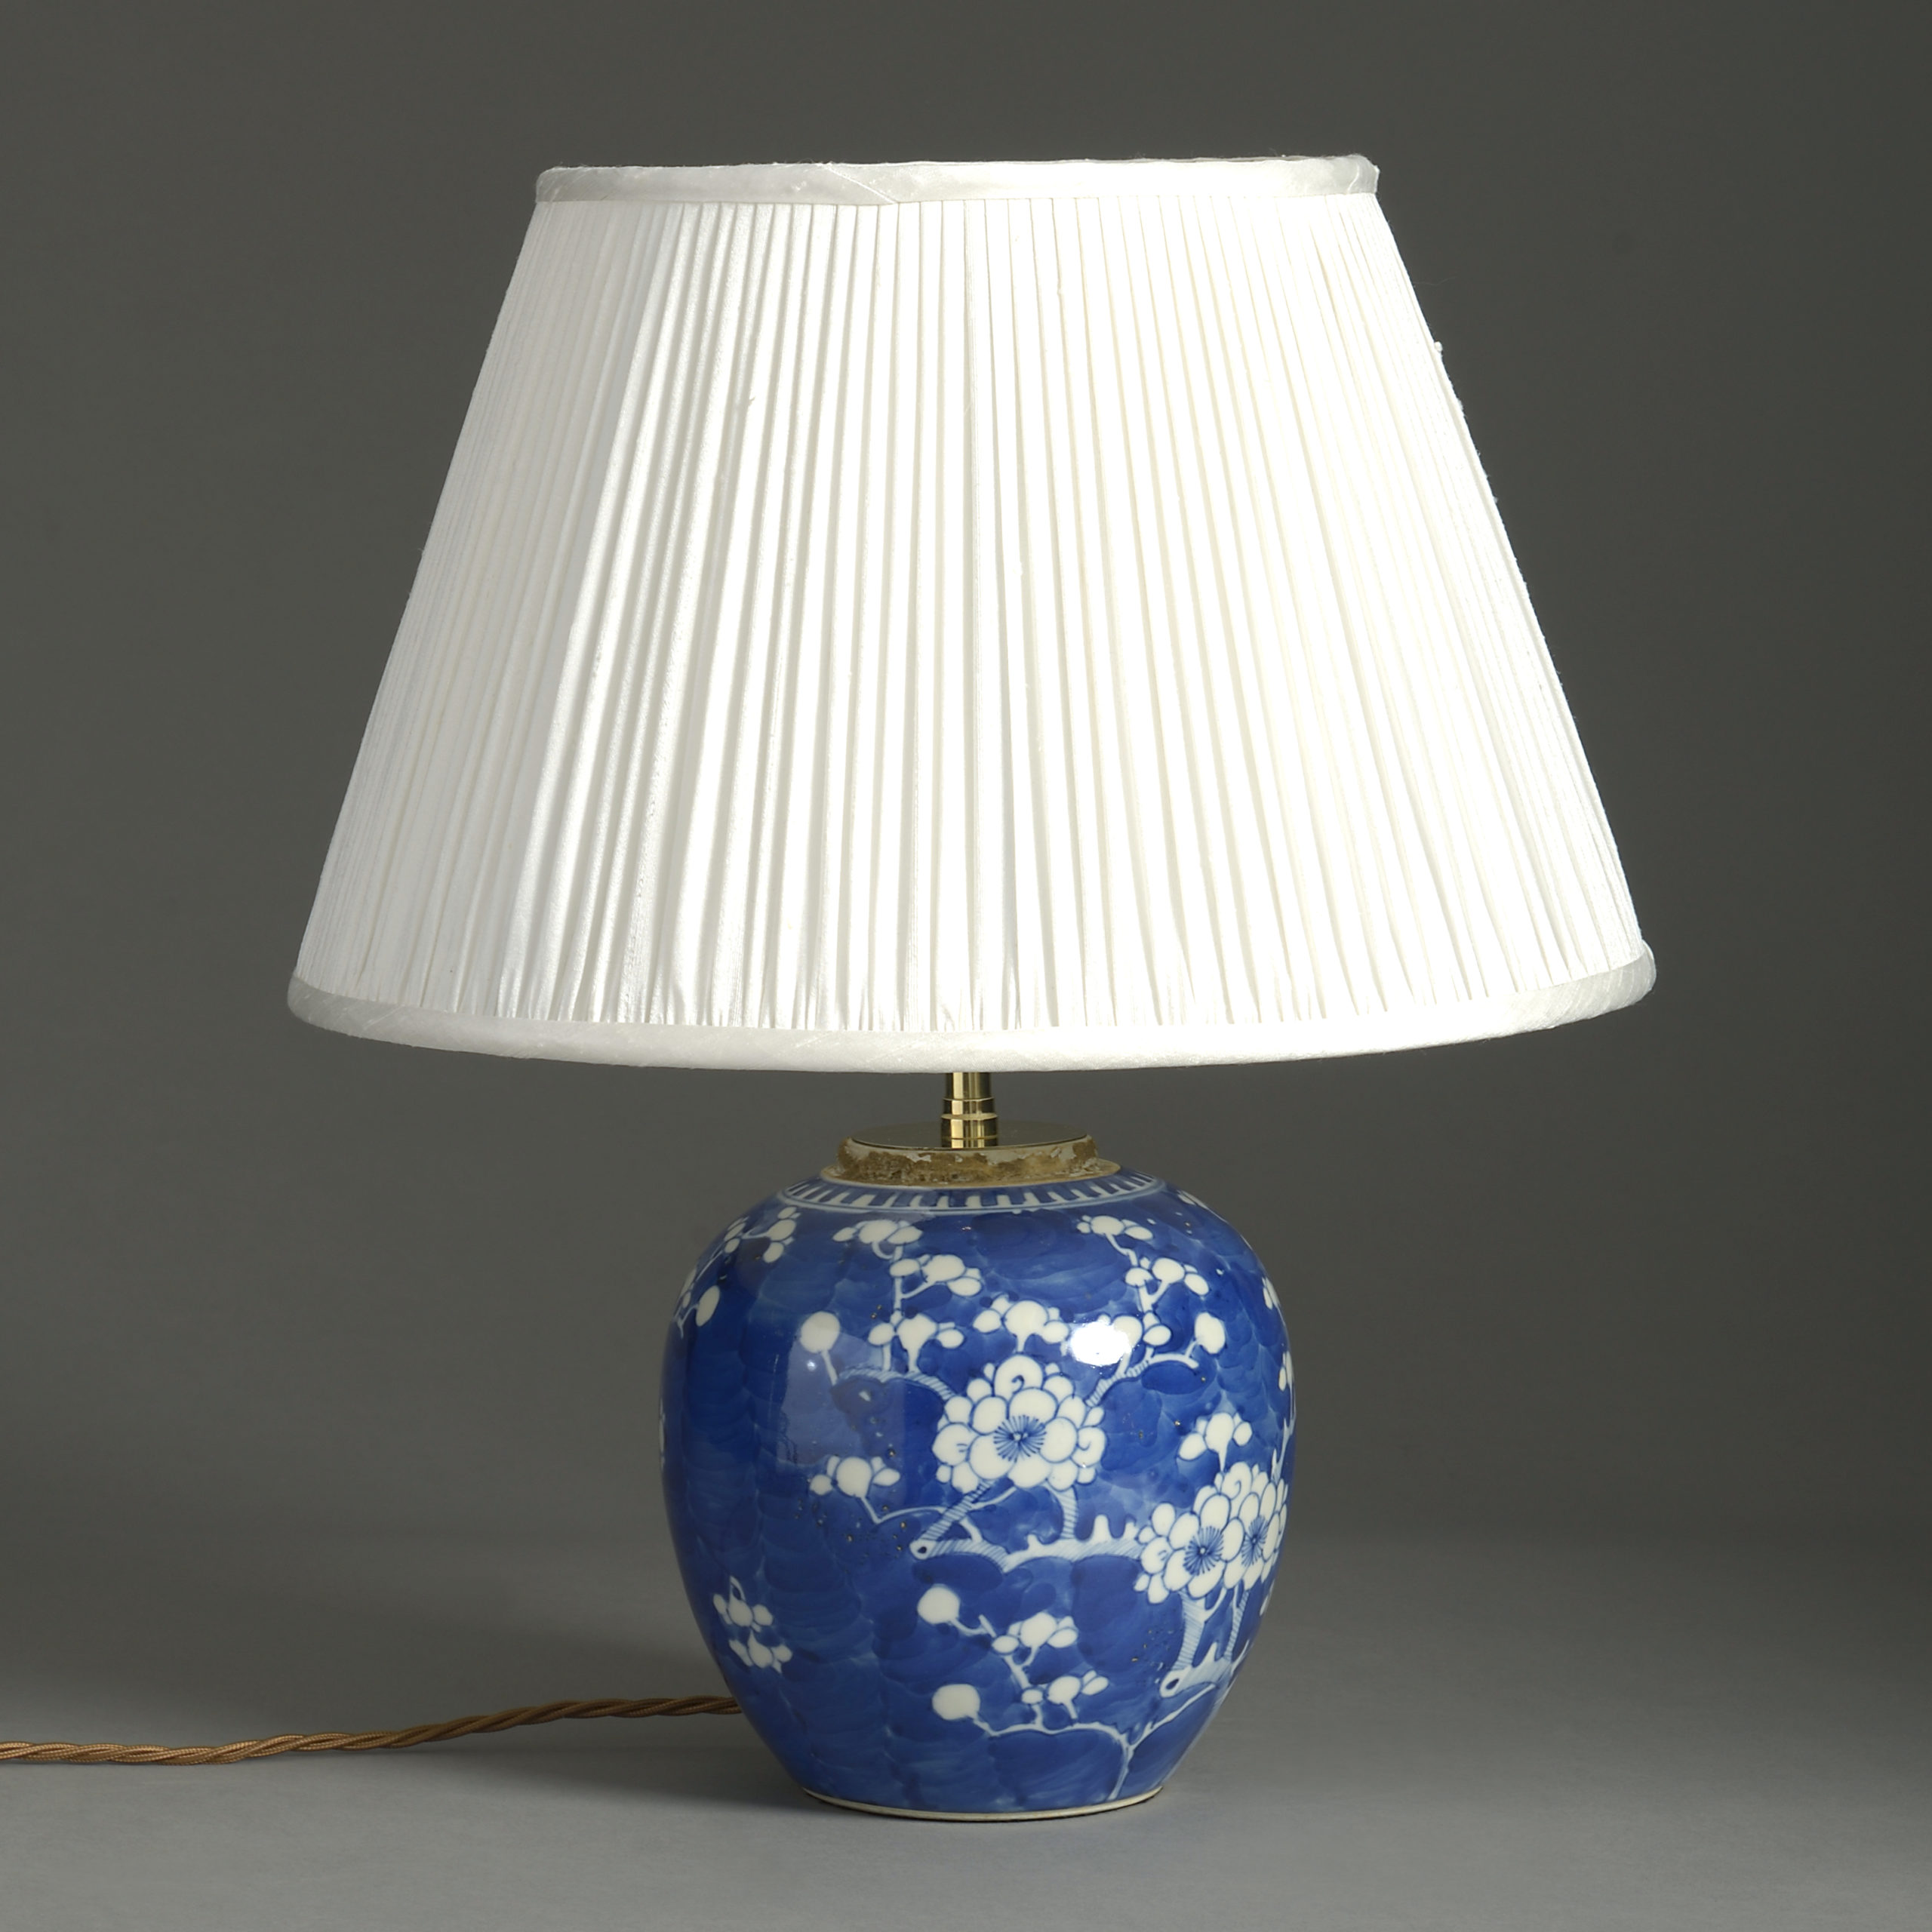 Porcelain Lamp Timothy Langston Fine, Small Blue And White Porcelain Lamp